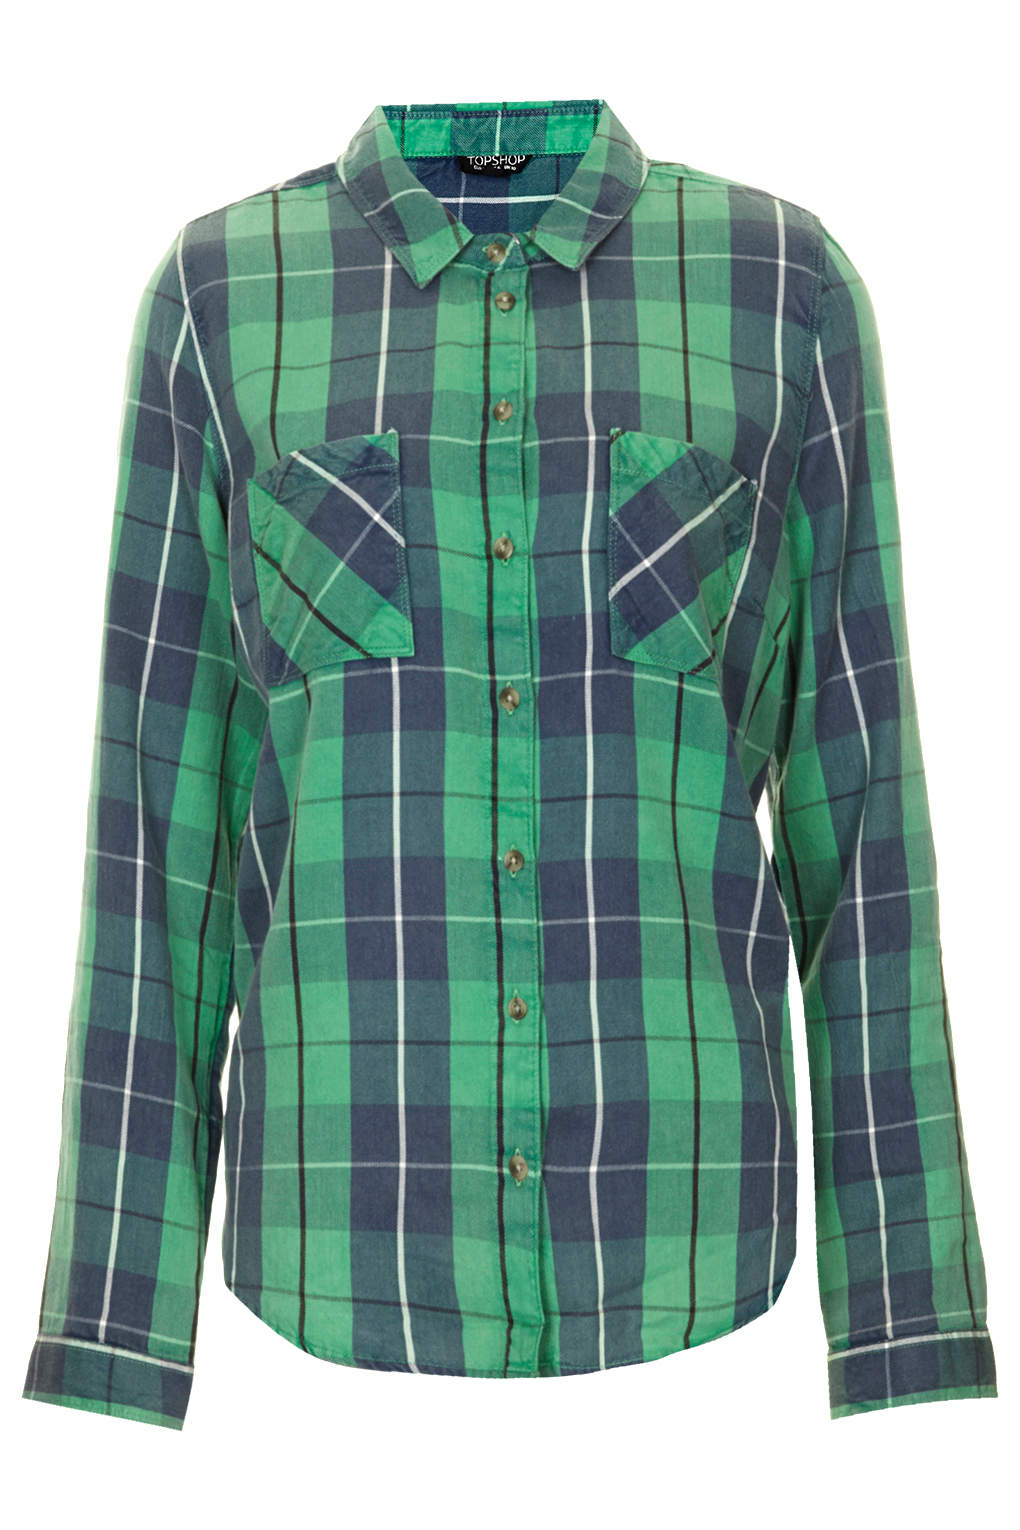 Topshop Long Sleeve Check Shirt in Green | Lyst